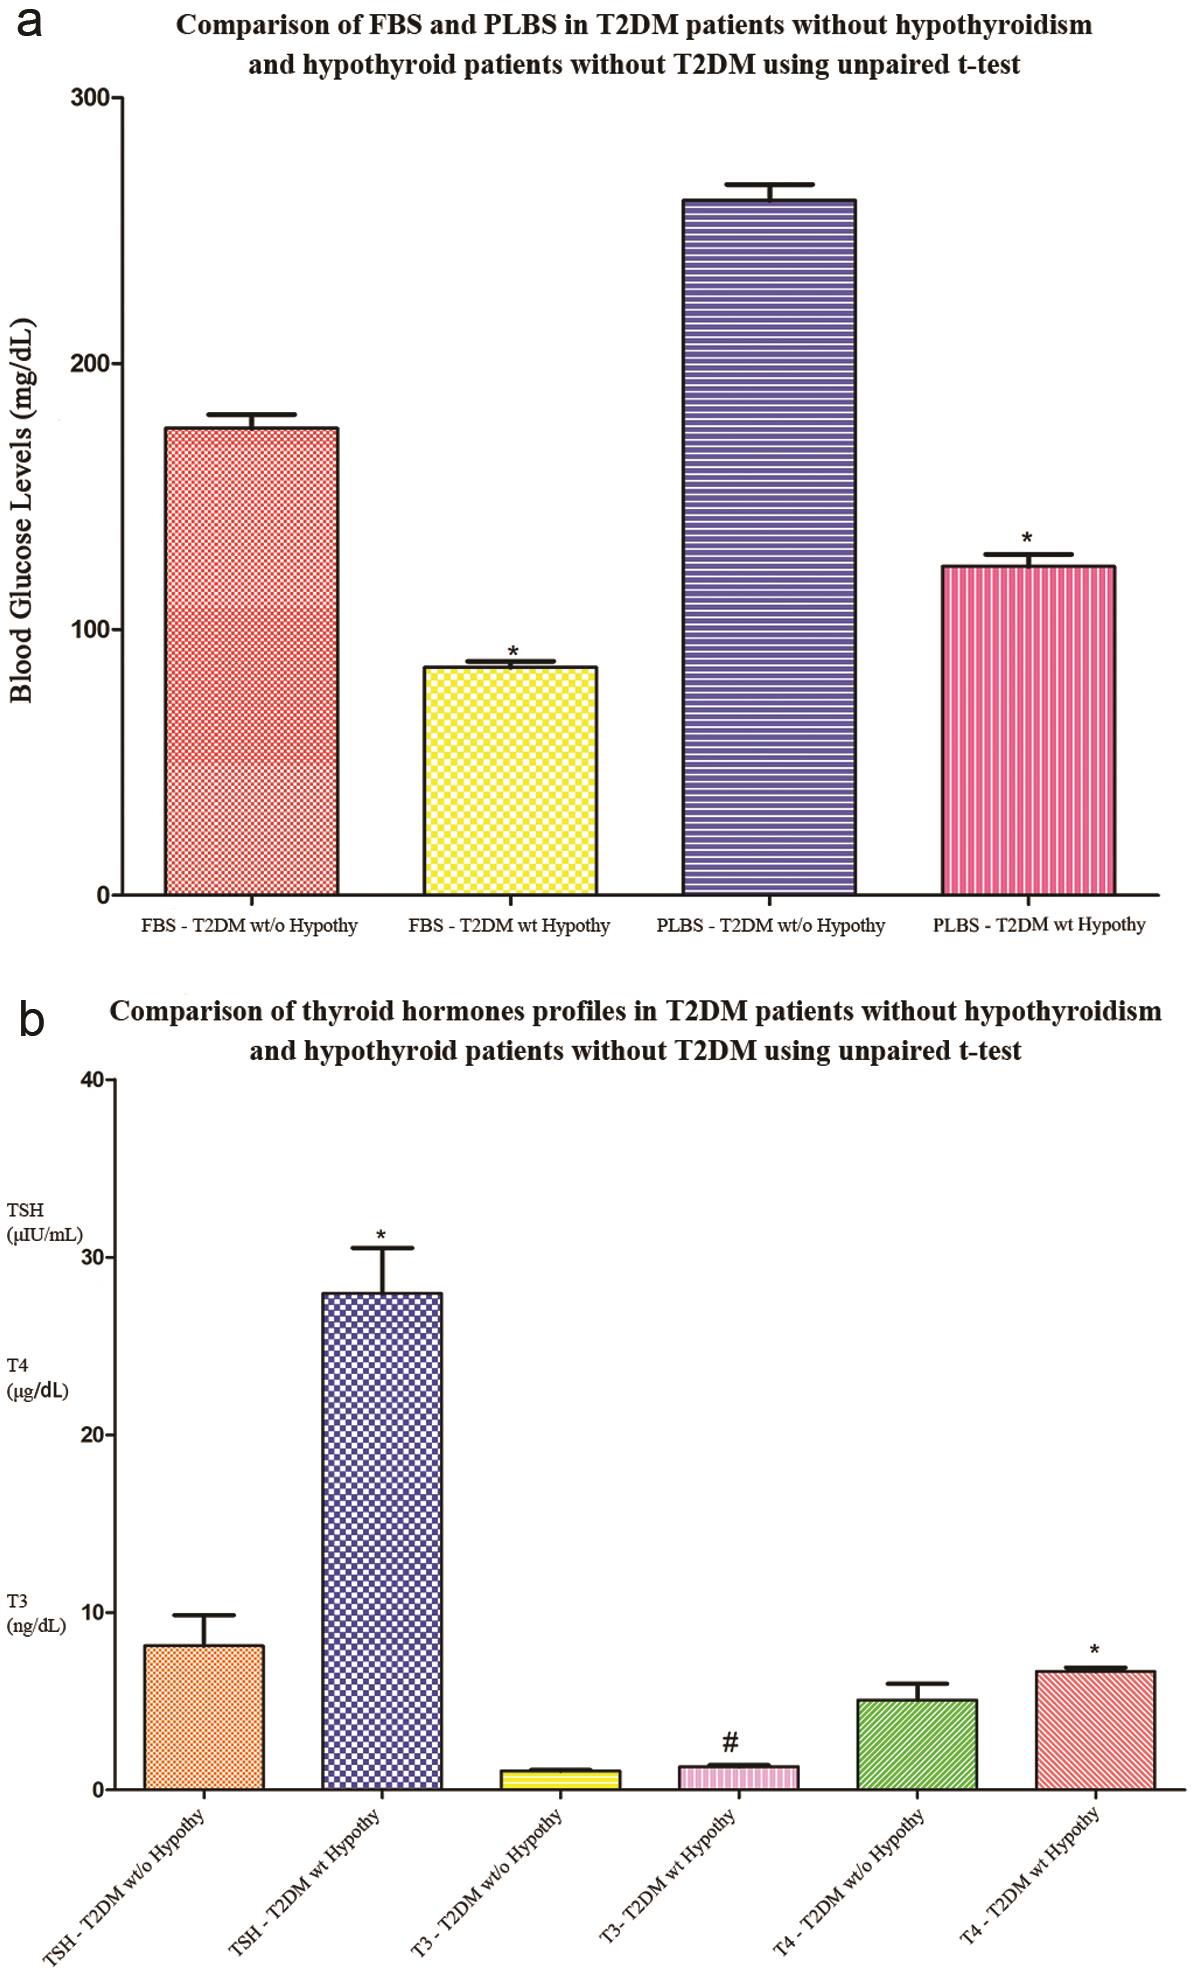 (a) Comparison of FBS and PLBS in T2DM patients without hypothyroidism and hypothyroid patients without T2DM using unpaired <italic>t</italic>-test; (b) Comparison of thyroid hormone profiles in T2DM patients without hypothyroidism and hypothyroid patients without T2DM using unpaired <italic>t</italic>-test. 